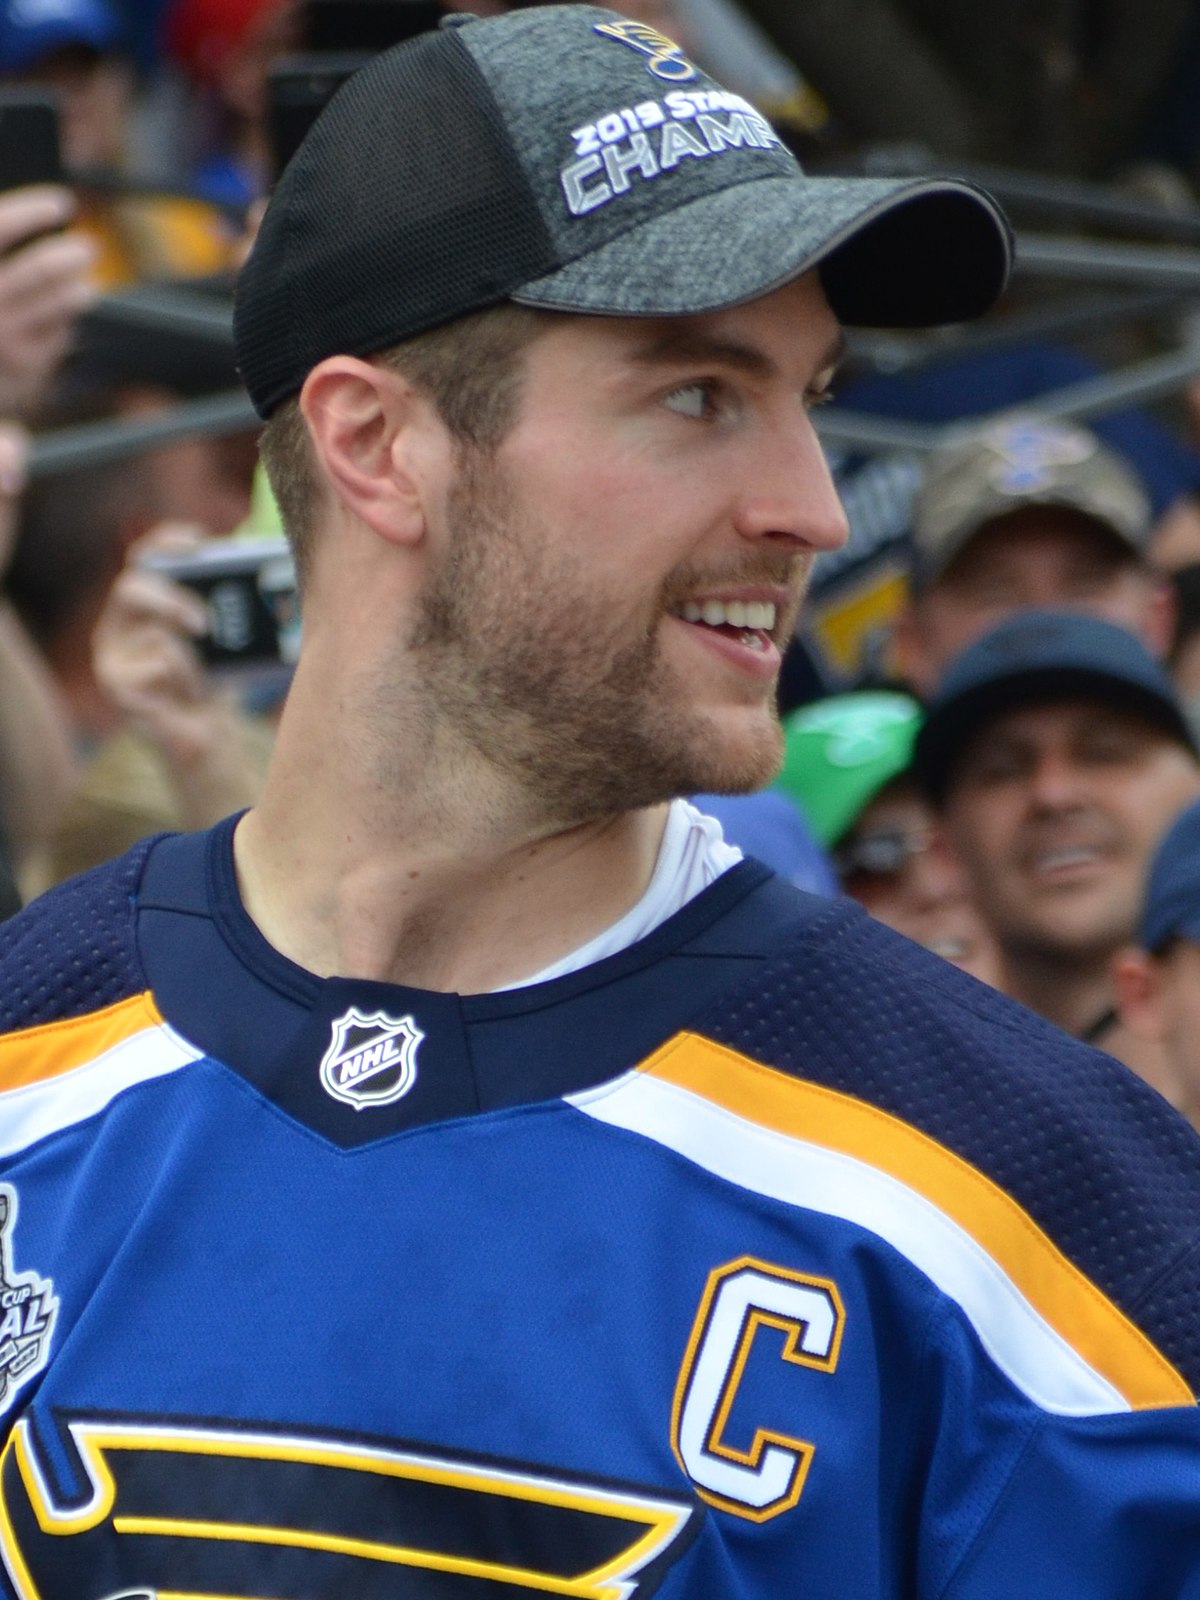 https://upload.wikimedia.org/wikipedia/commons/thumb/d/d7/Alex_Pietrangelo_during_the_2019_Stanley_Cup_parade_%281%29.jpg/1200px-Alex_Pietrangelo_during_the_2019_Stanley_Cup_parade_%281%29.jpg